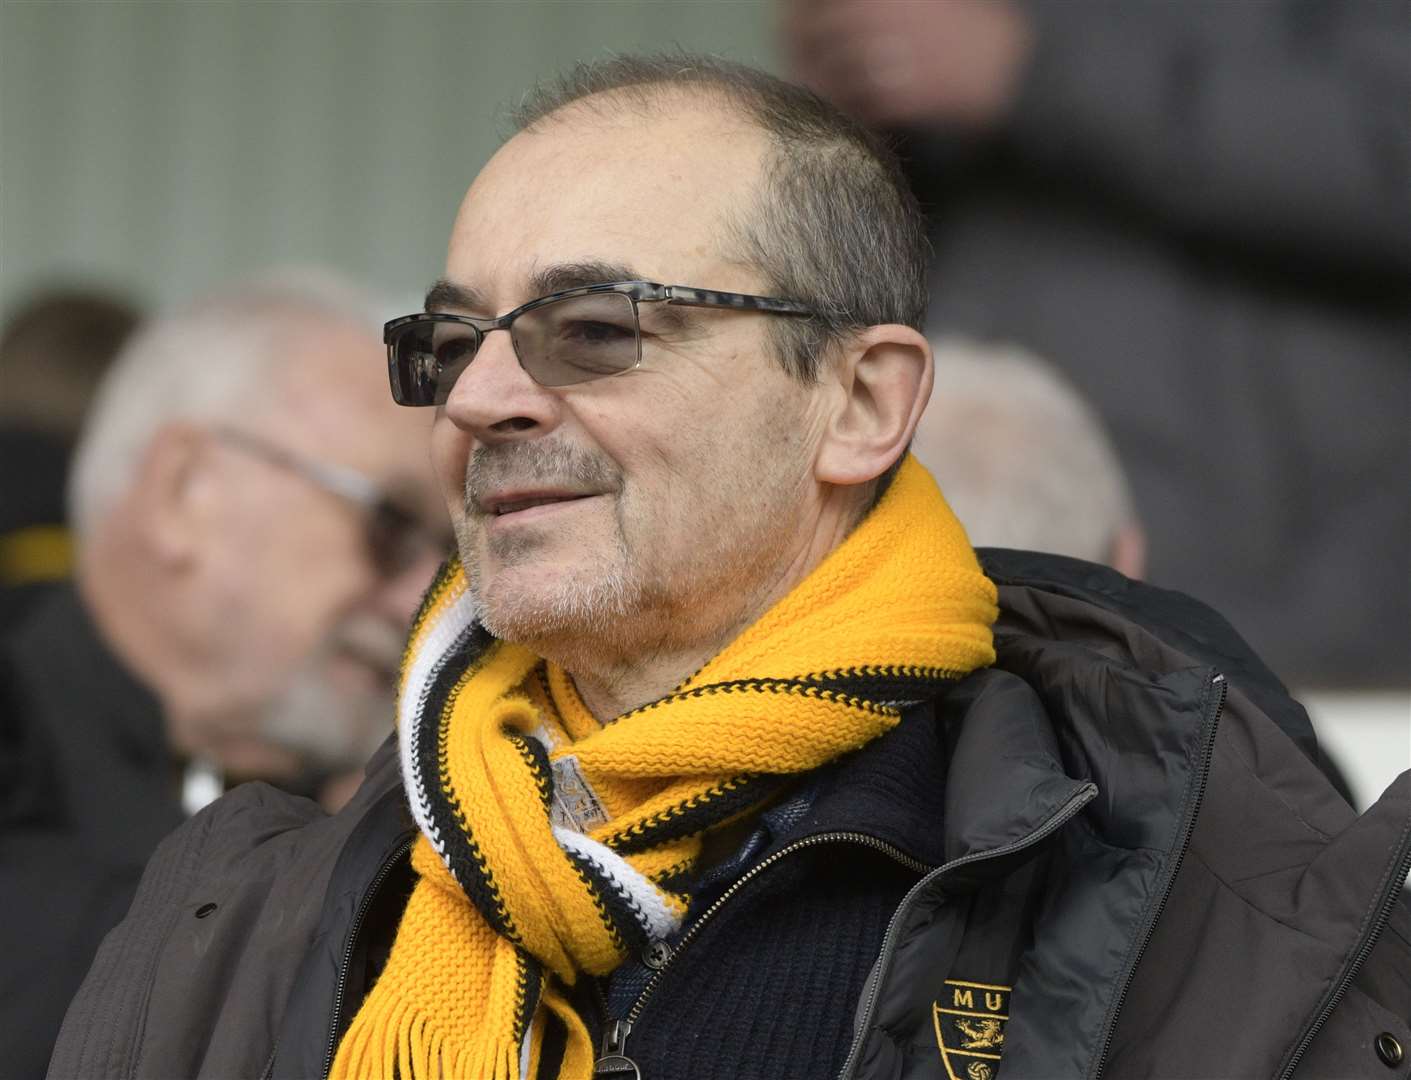 Maidstone United co-owner Oliver Ash watches on at Ipswich. Picture: Barry Goodwin